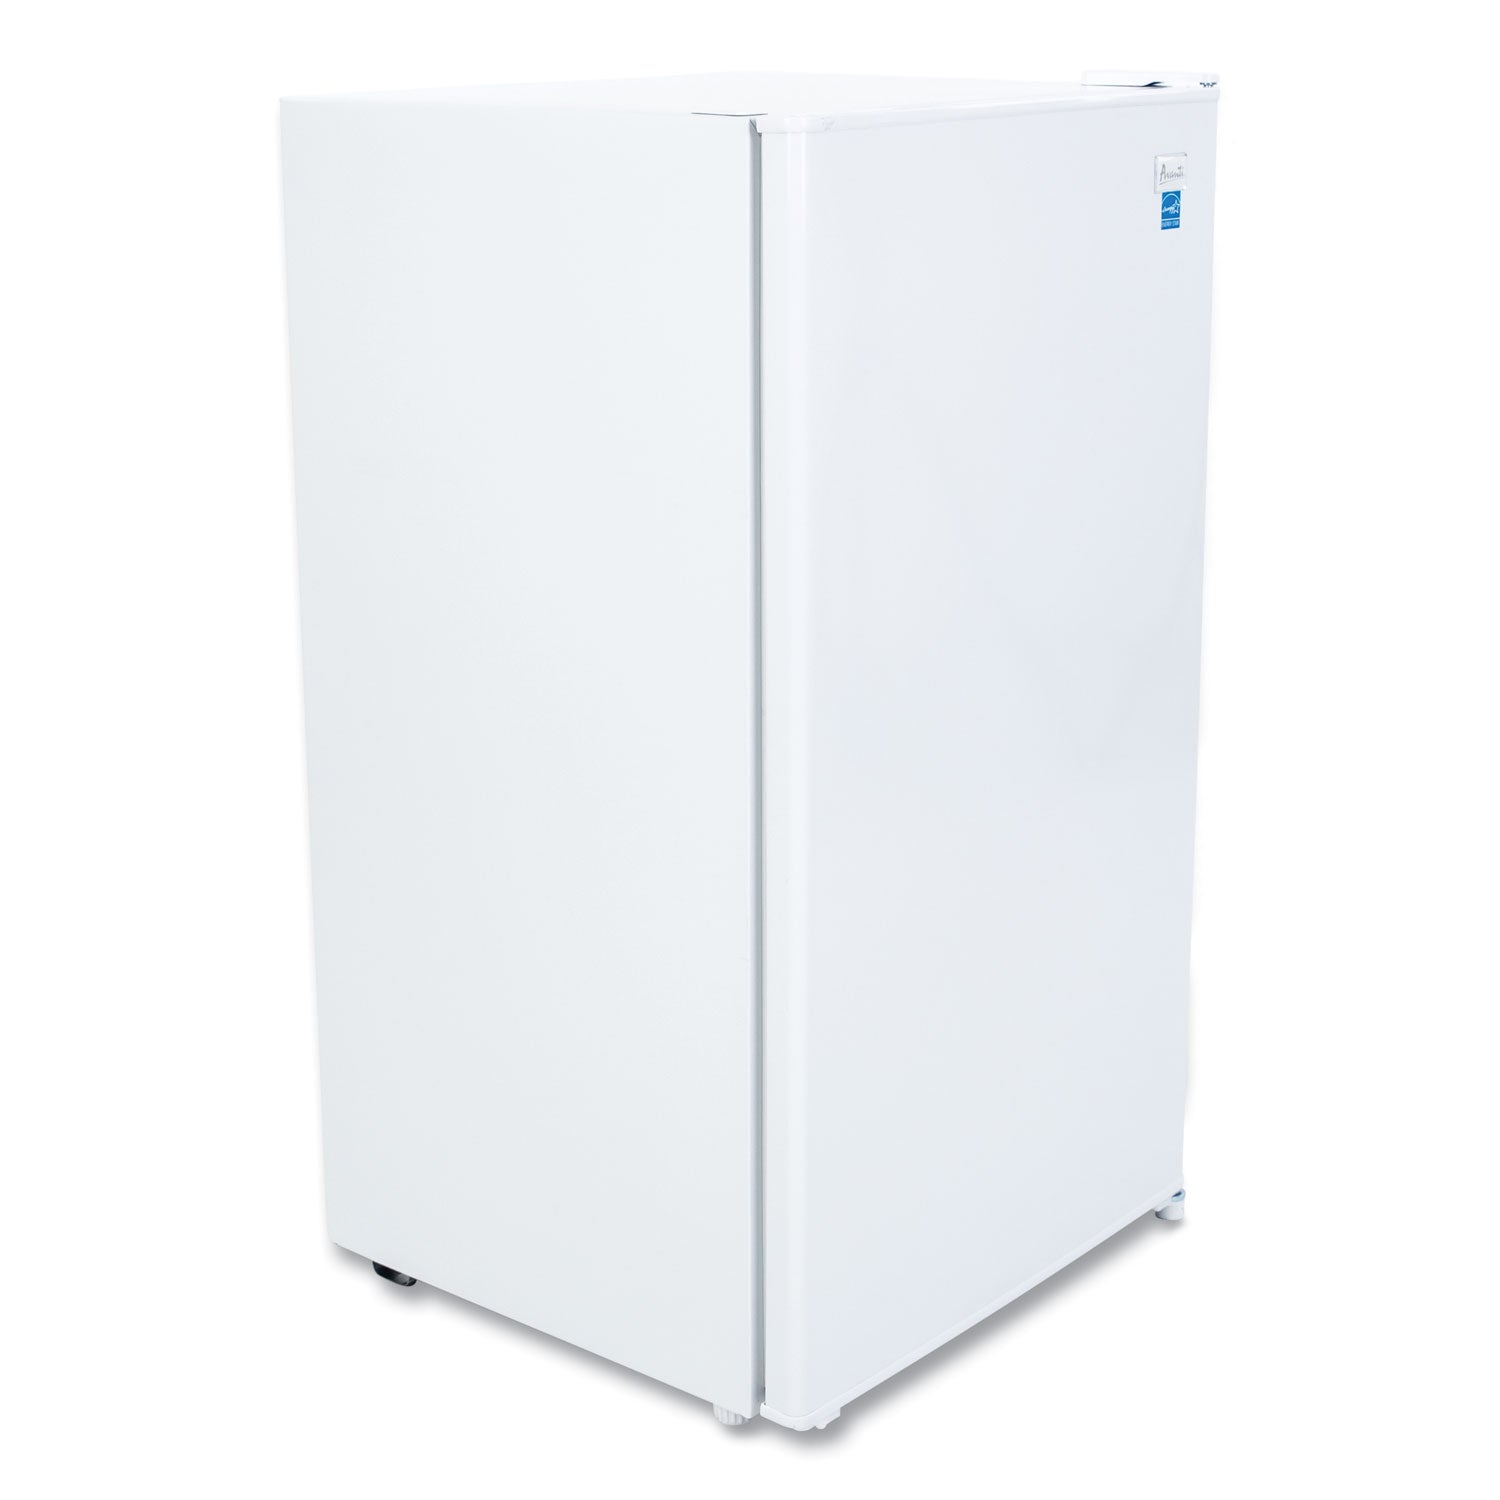 3.3 Cu.Ft Refrigerator with Chiller Compartment, White - 